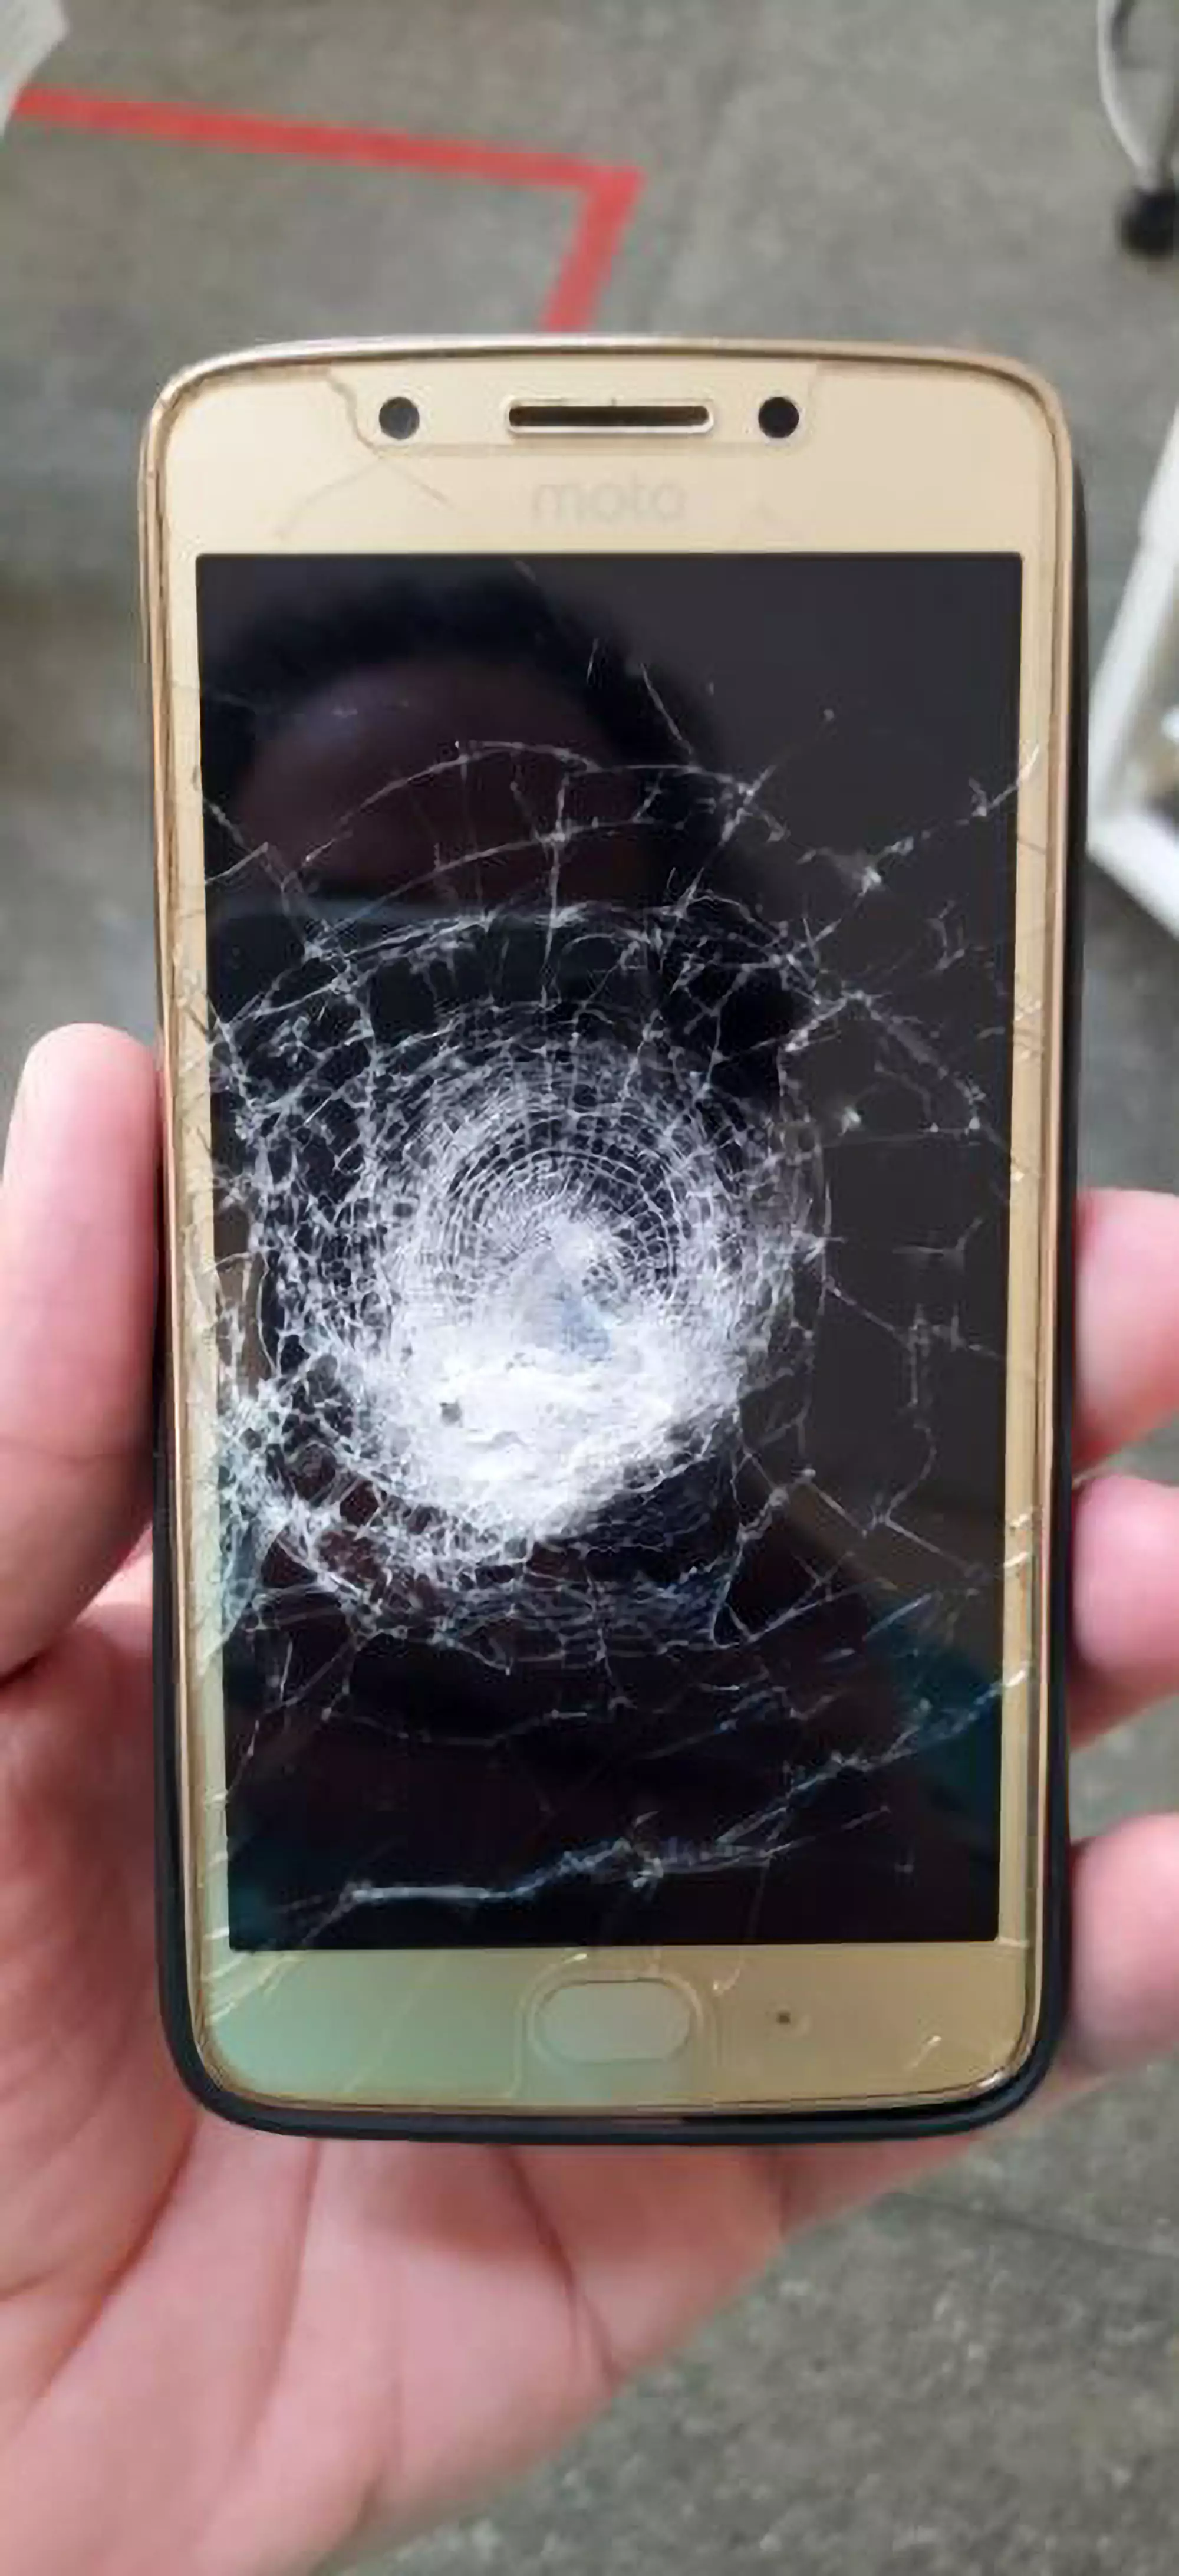 The smartphone took the deadly force of the bullet.